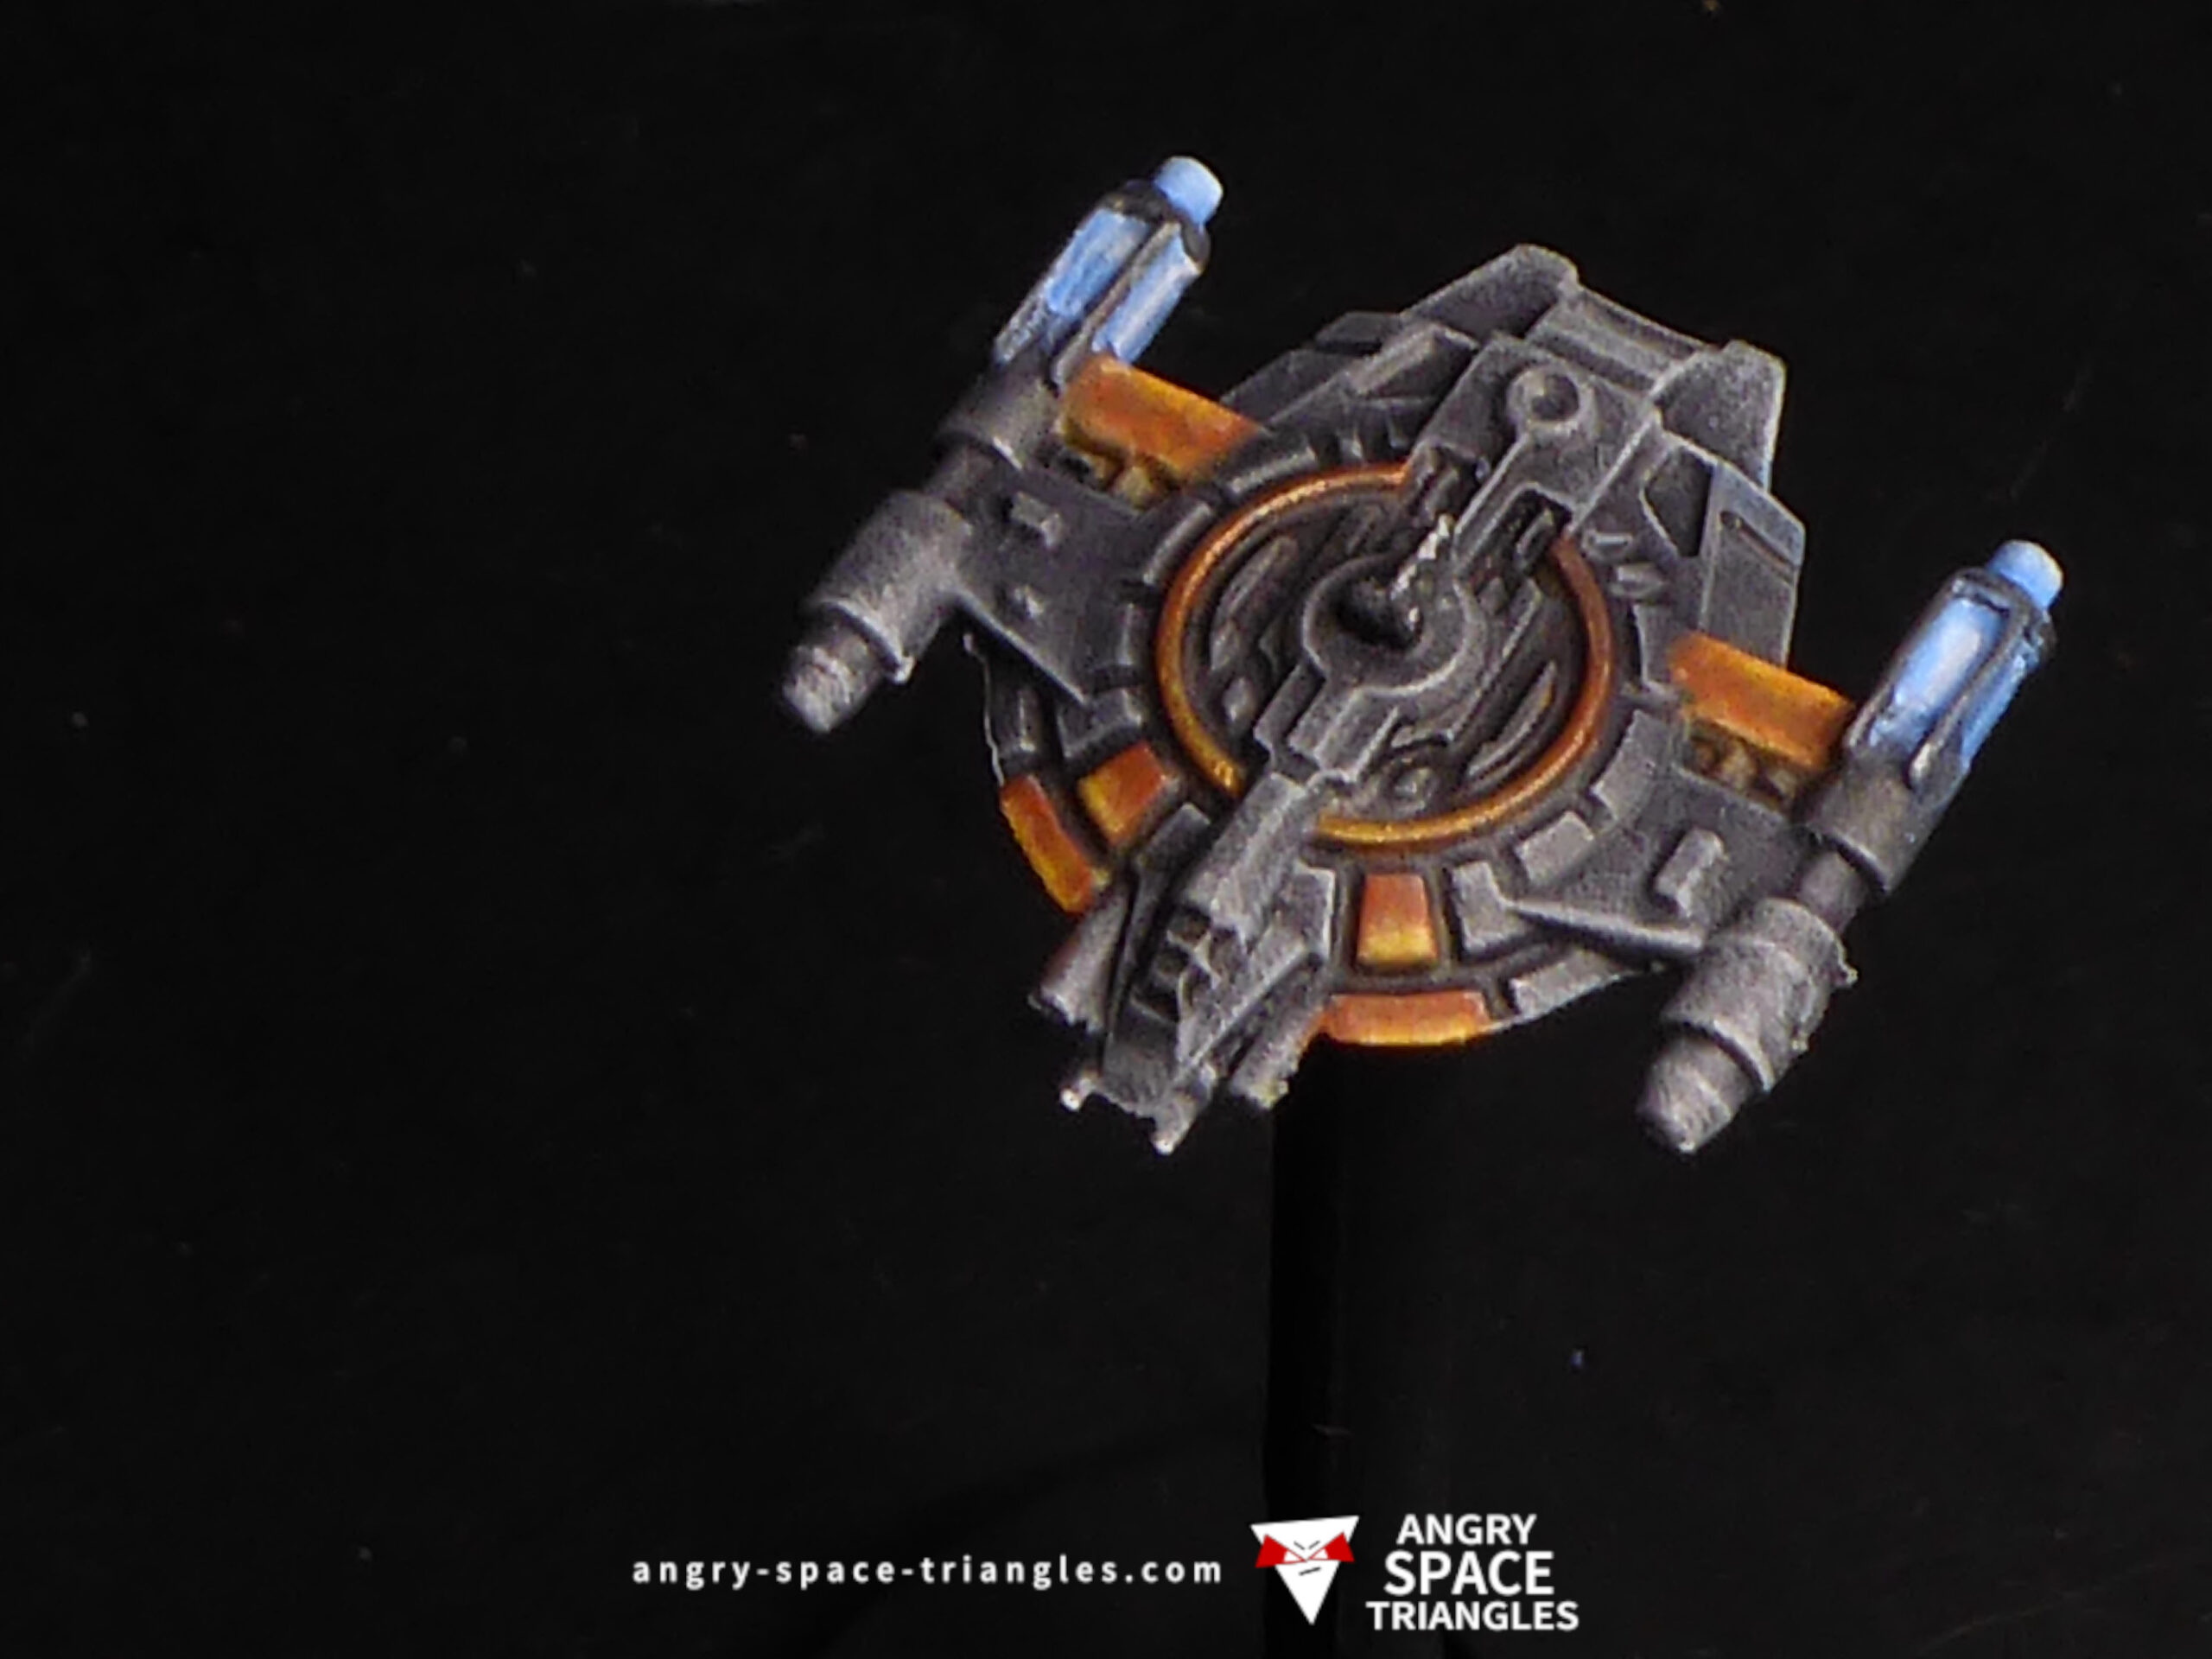 Painted Lancer Pursuit Craft for a Star Wars Armada Commission